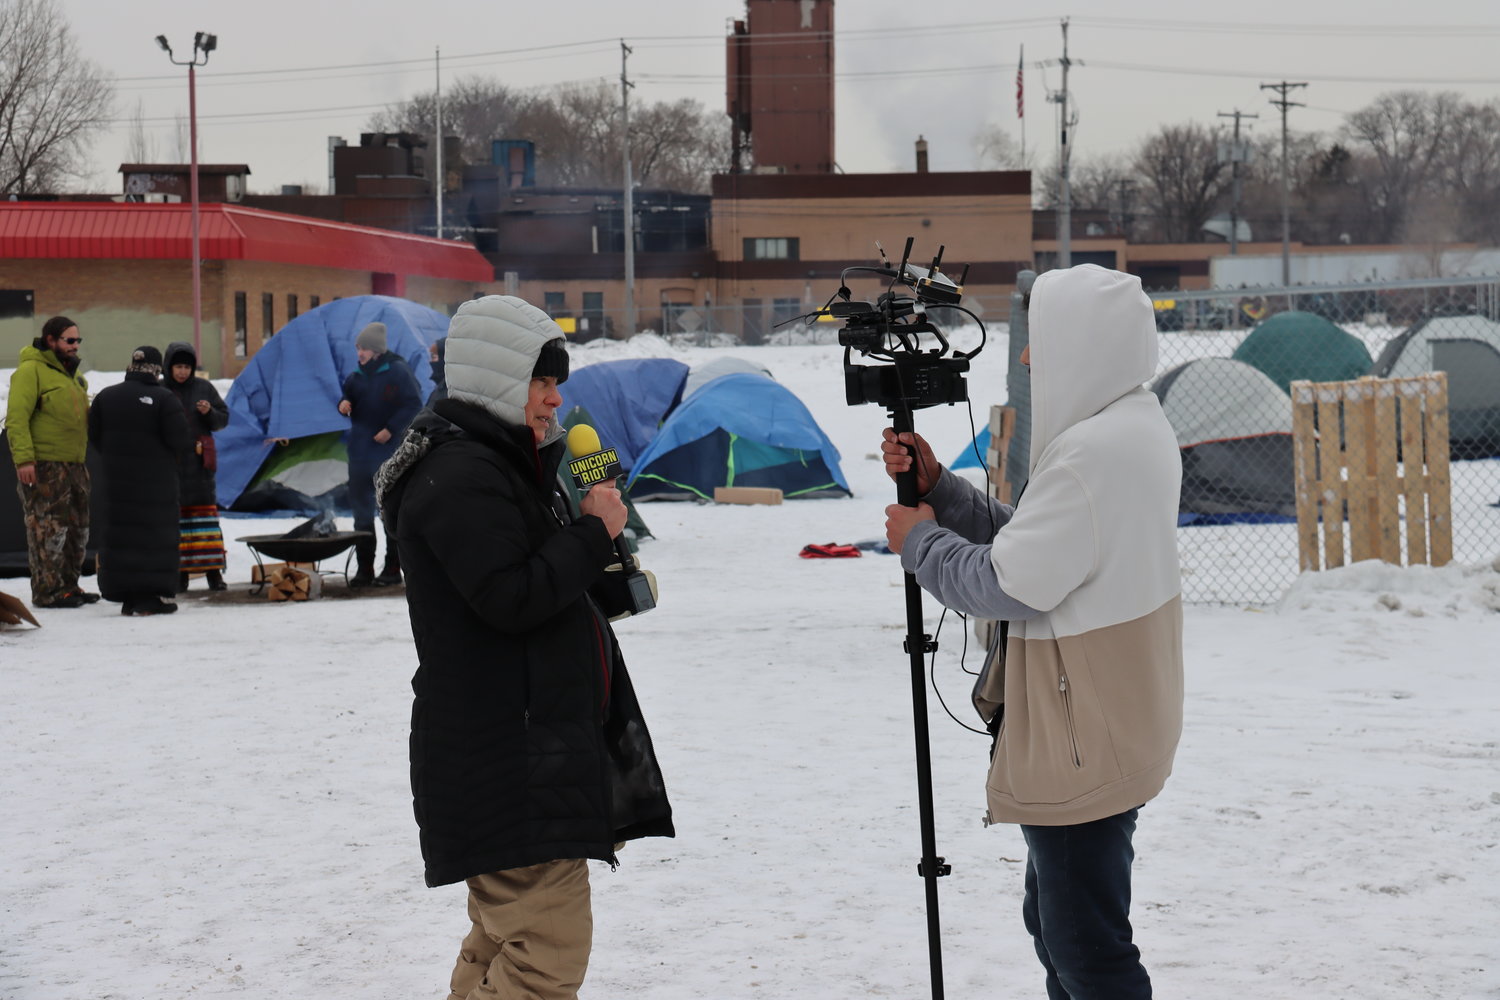 Delaney Russell, a south Minneapolis resident, is interviewed by Unicorn Riot during the occupation by Indigenous people and allies of the Roof Depot that began at dawn on Tuesday, Feb. 21 and lasted through evening when Nenoocaasi Camp was disbanded forcibly on the orders of Mayor Frey by over 100 officers and 50 squad cars. (Photo by Tesha M. Christensen)